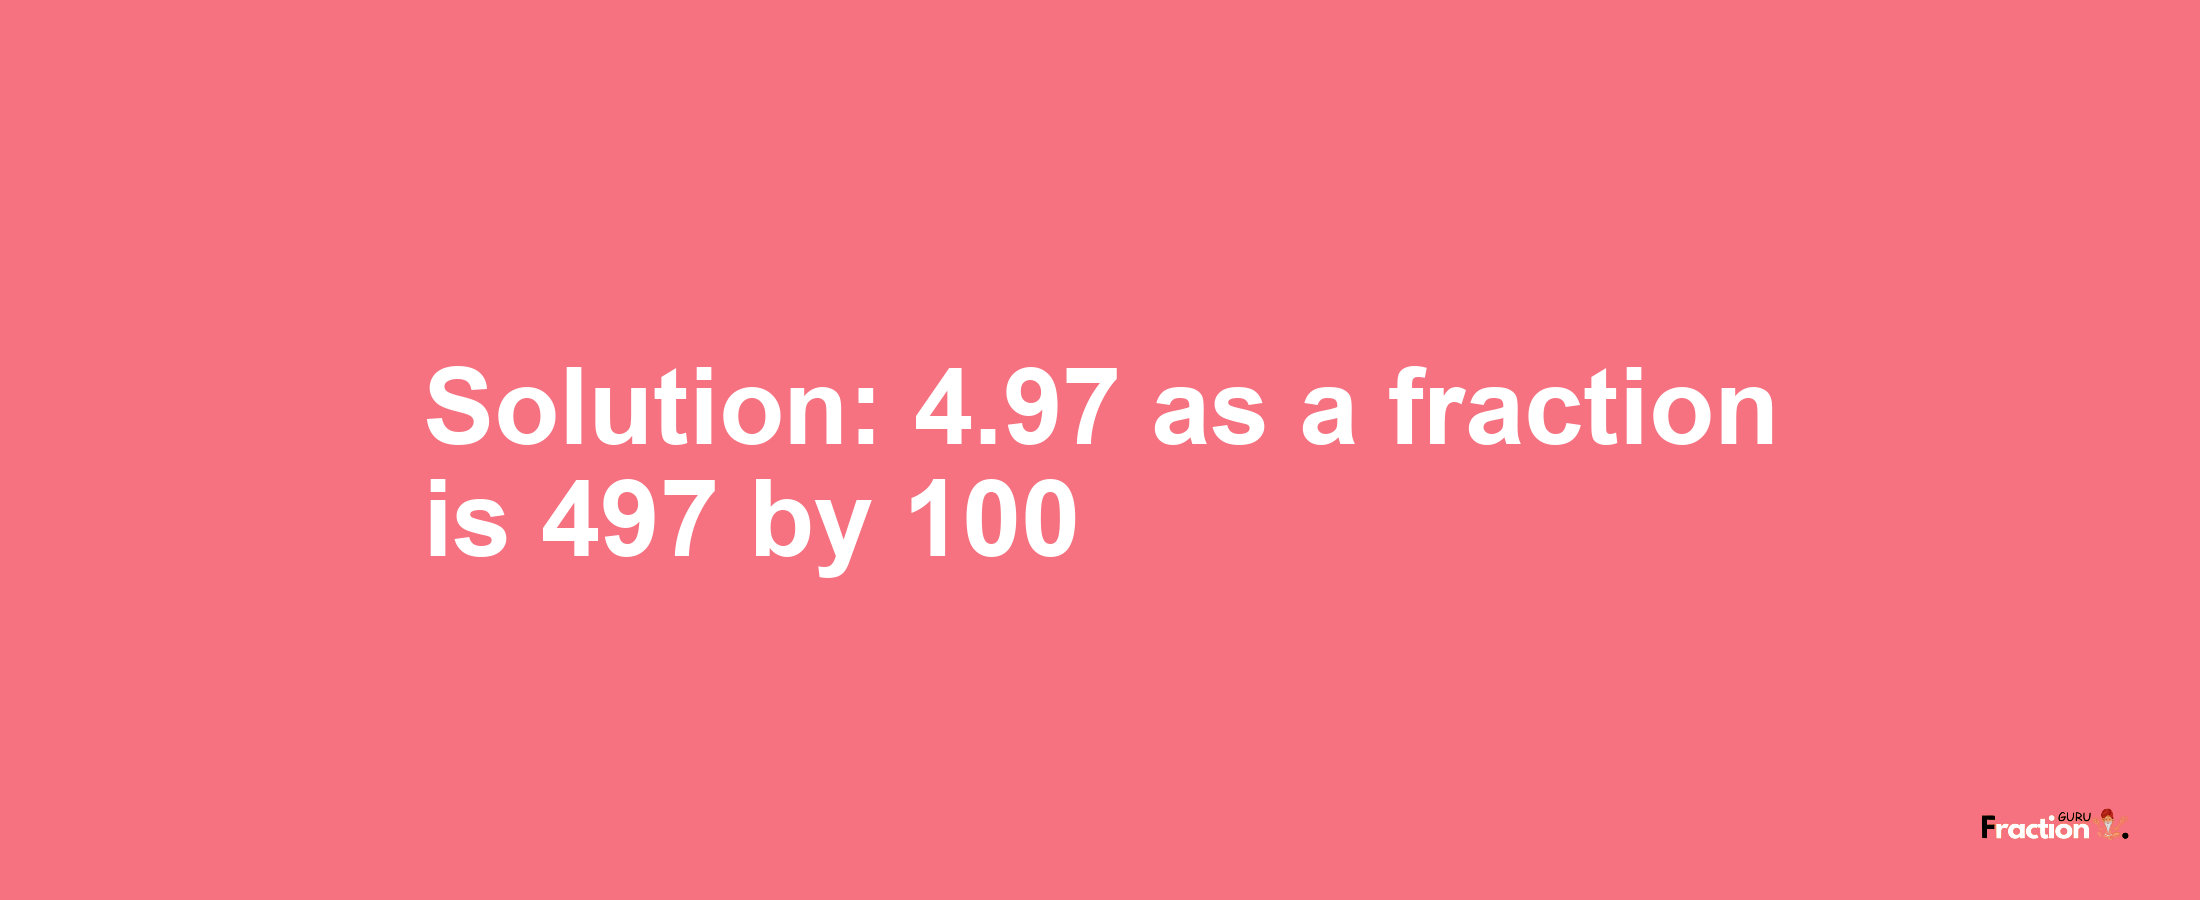 Solution:4.97 as a fraction is 497/100